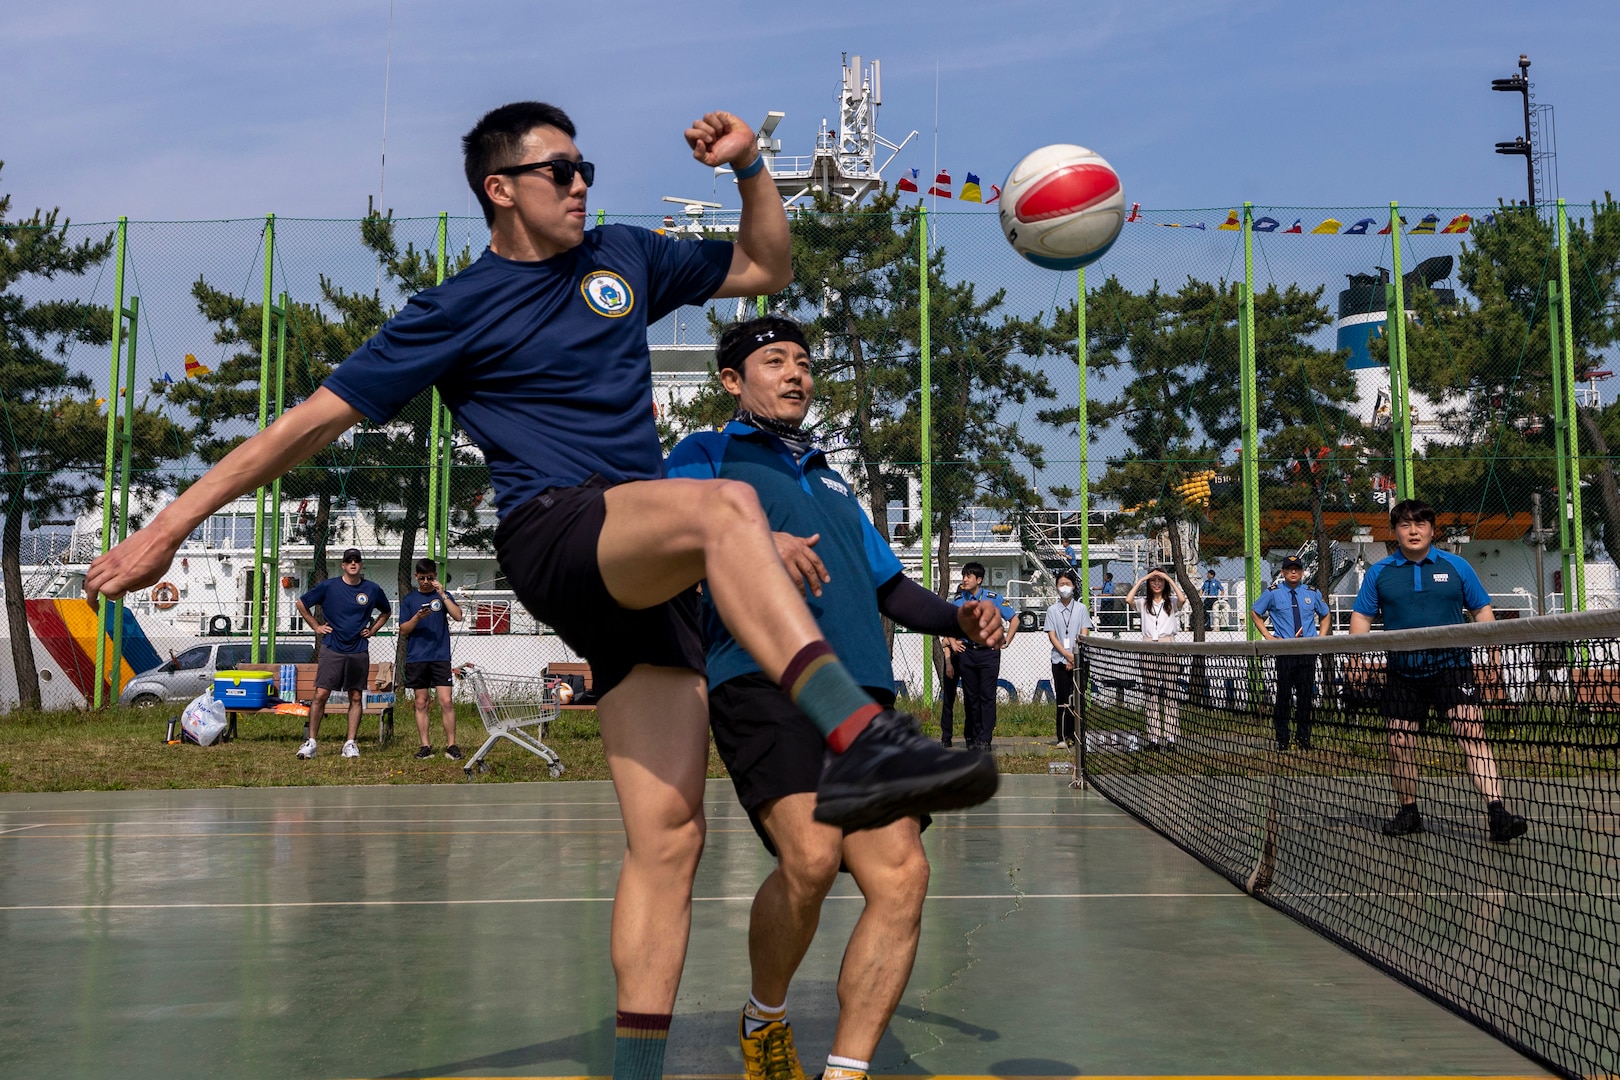 U.S. Coast Guardsmen Seaman Larry Zhou, assigned to the U.S. Coast Guard Cutter Waesche (WMSL-751), kicks a ball during a sports day in Pohang, Republic of Korea, June 10, 2024. United States and Korea Coast Guardsmen came together to play jokgu to build stronger relationship and cooperation between the servicemembers of each nation. Waesche is the second U.S. Coast Guard National Security Cutter deployed to the Indo-Pacific in 2024. Coast Guard cutters routinely deploy to the region to engage with partner nations to ensure a free and open Indo-Pacific. (U.S. Marine Corps photo by Cpl. Elijah Murphy)